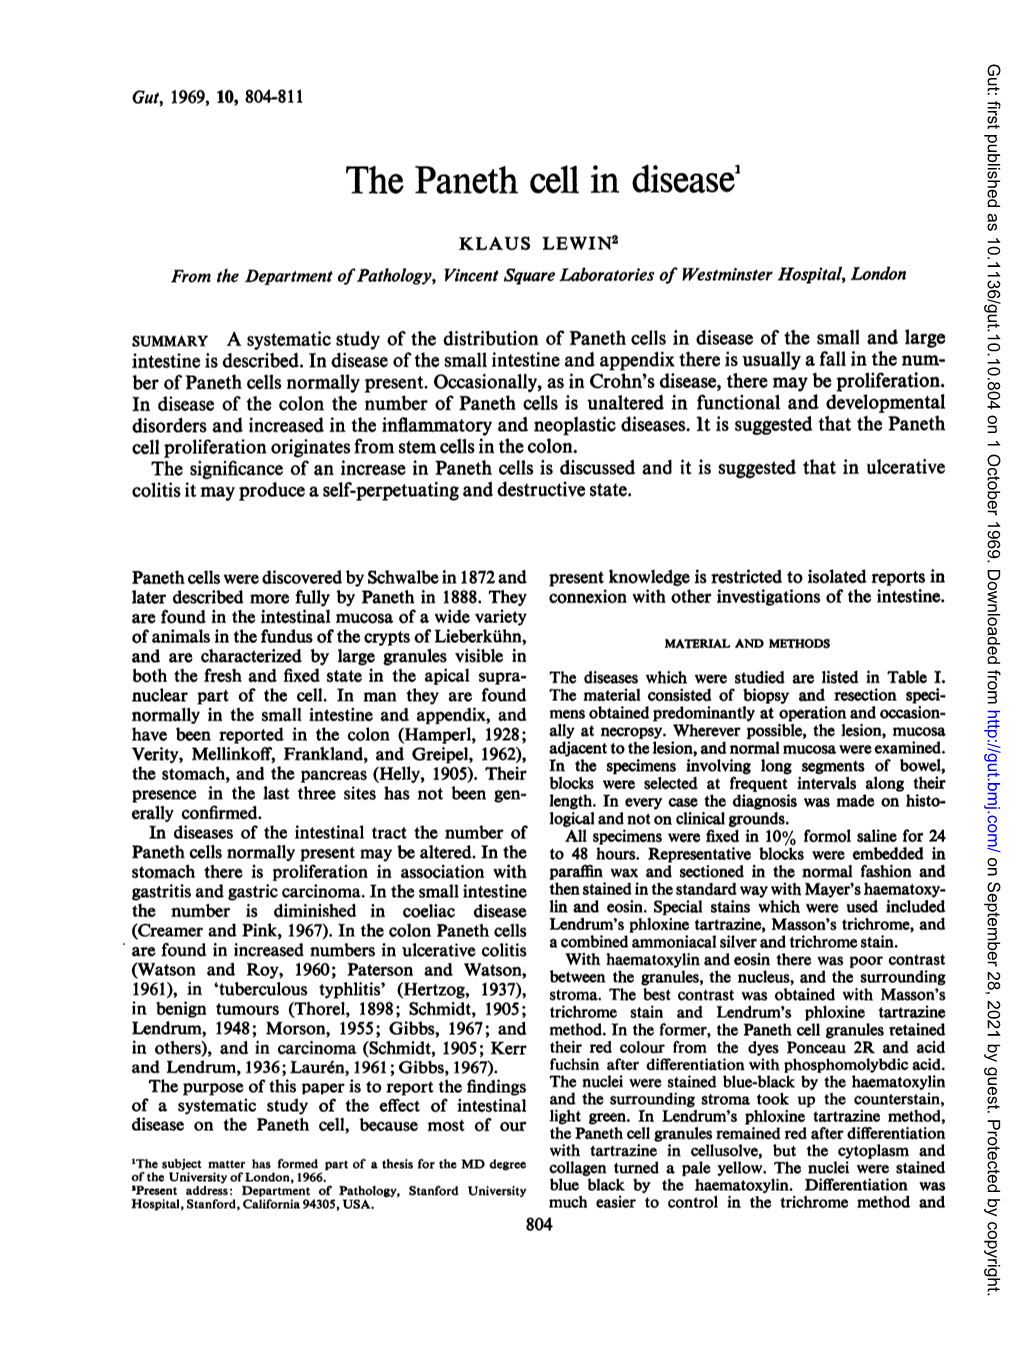 The Paneth Cell in Disease'